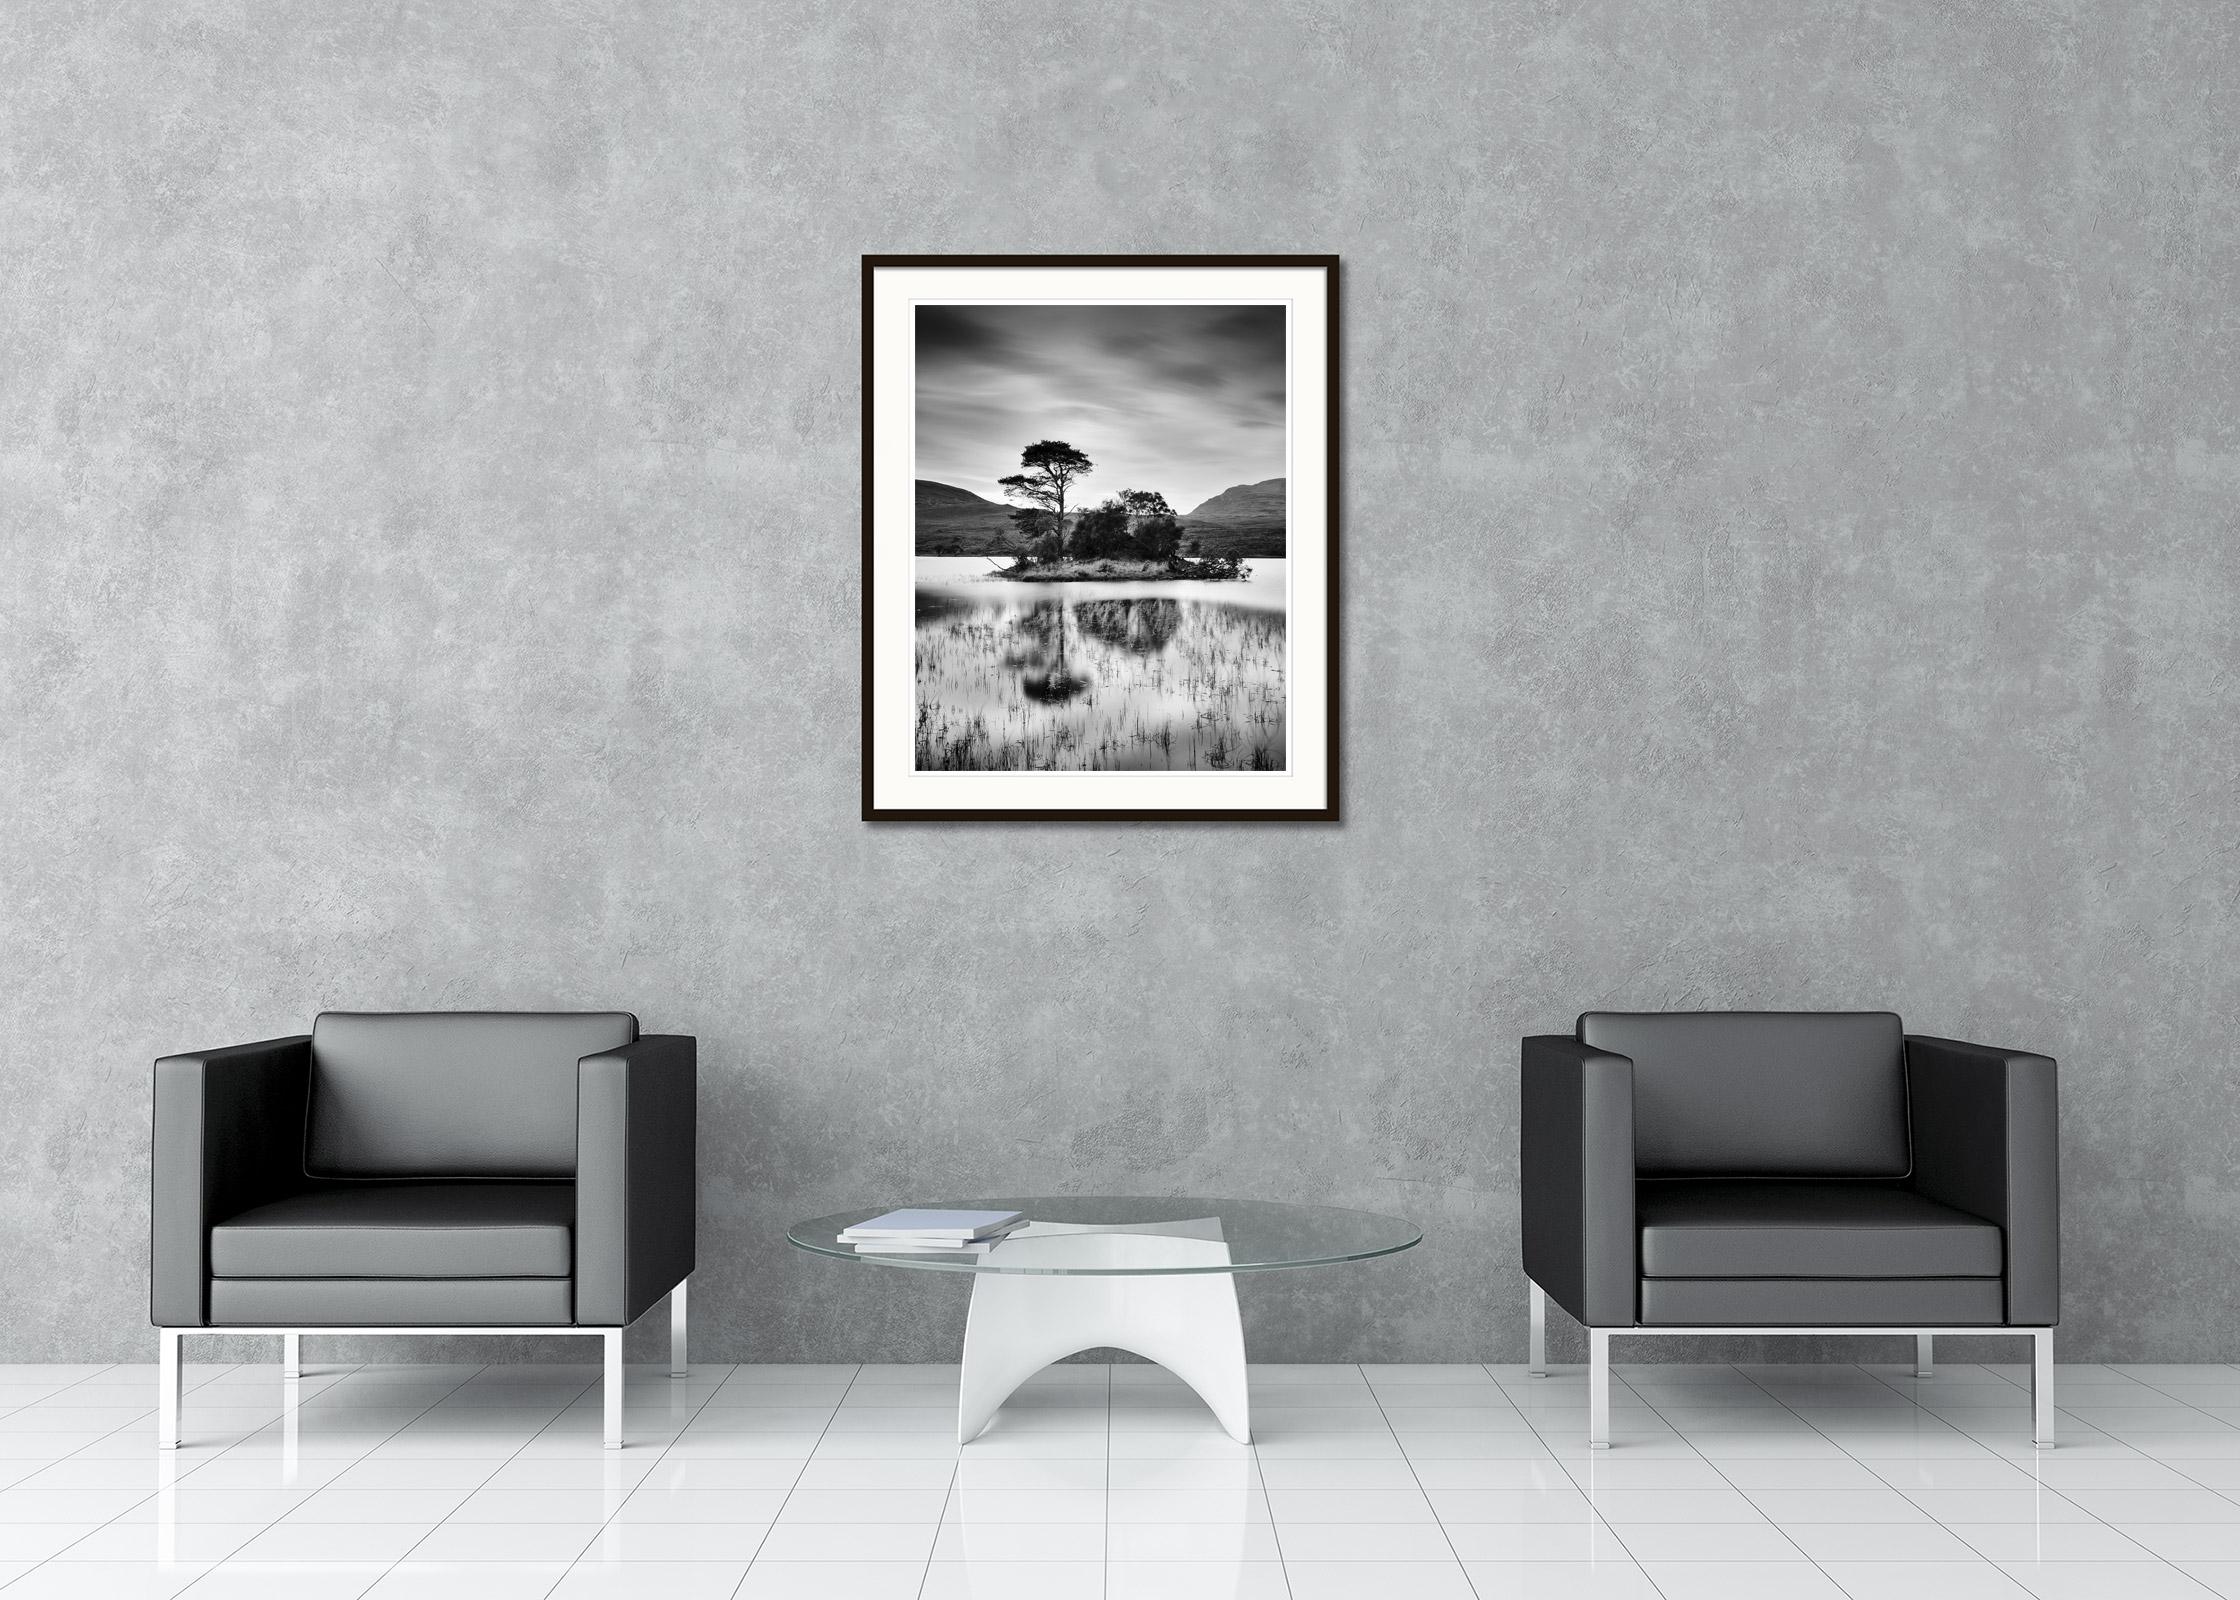 Black and white fine art long exposure seascape - landscape photography. Island with trees on a small mountain lake in the highlands of Scotland at sunset. Archival pigment ink print, edition of 15. Signed, titled, dated and numbered by artist.